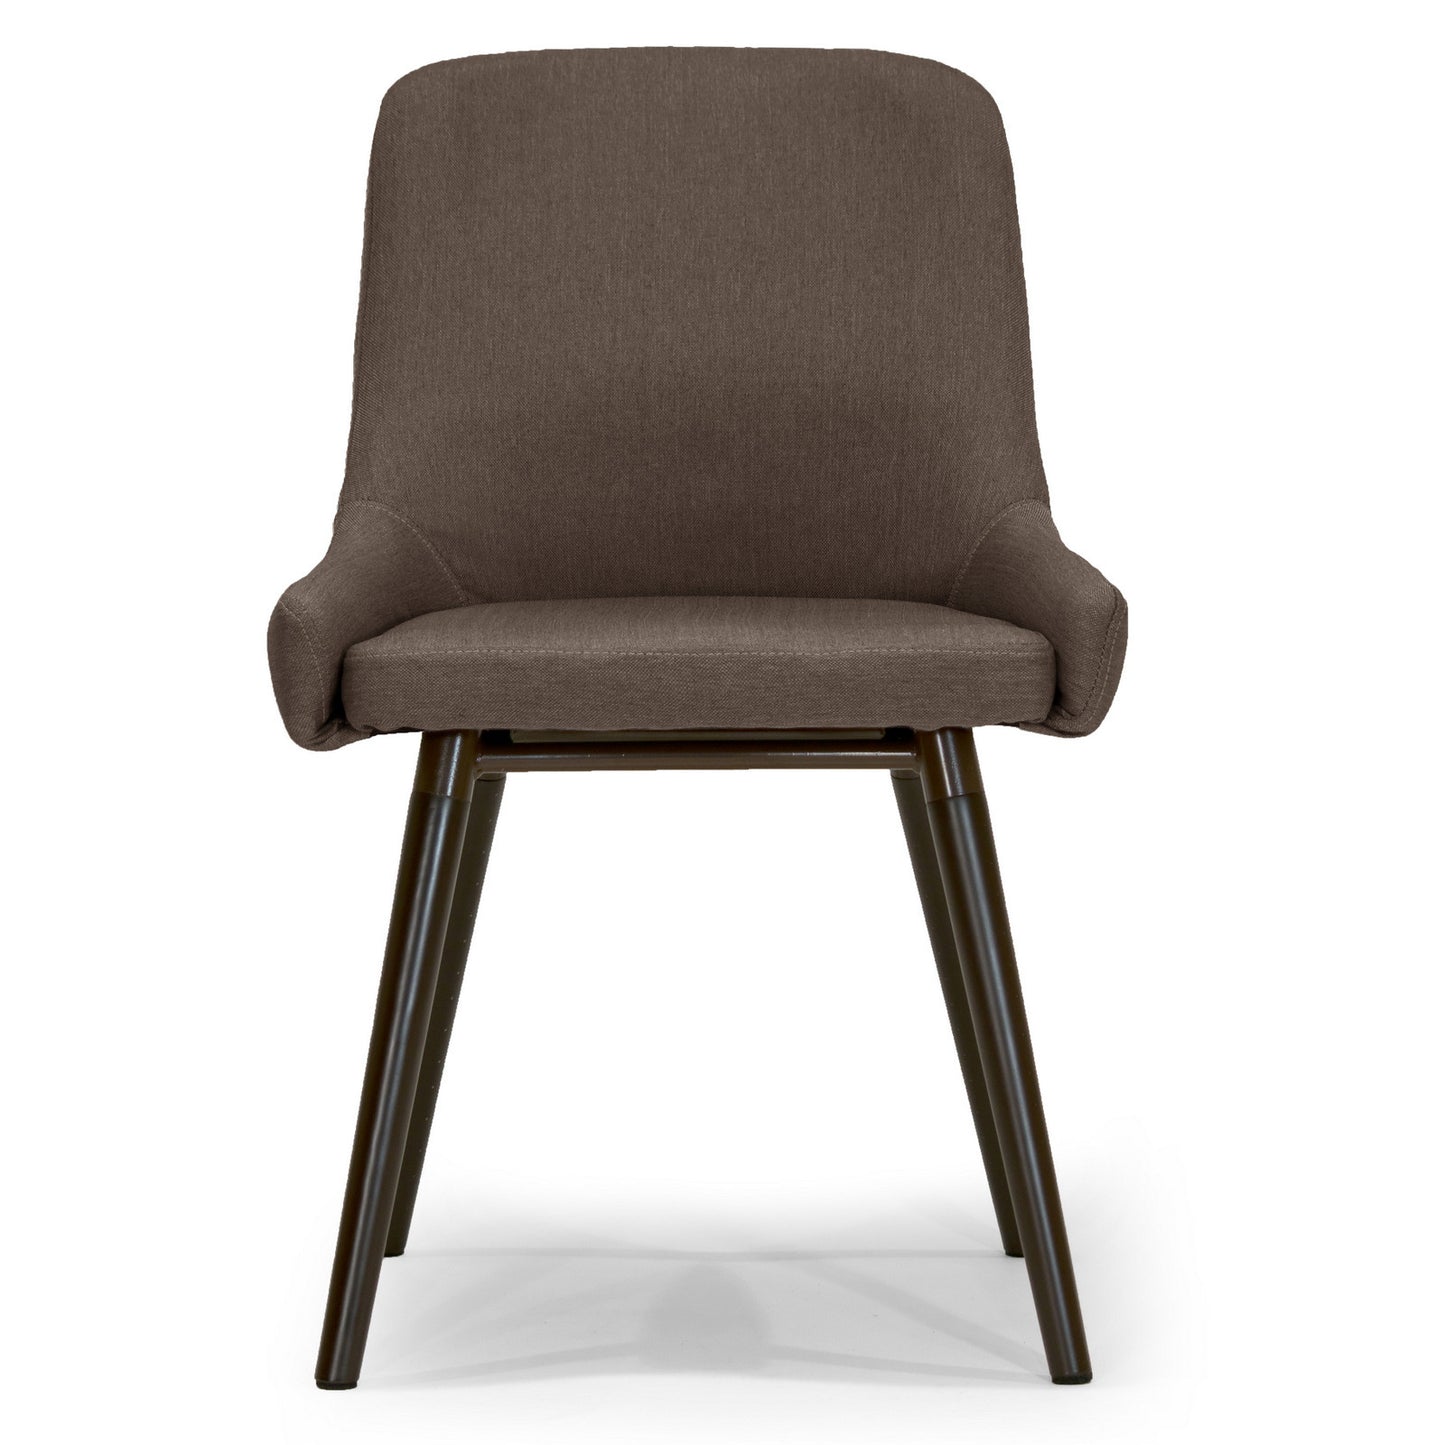 Ade Modern Taupe Fabric Dining Chair with Beech Legs (Set of 2)